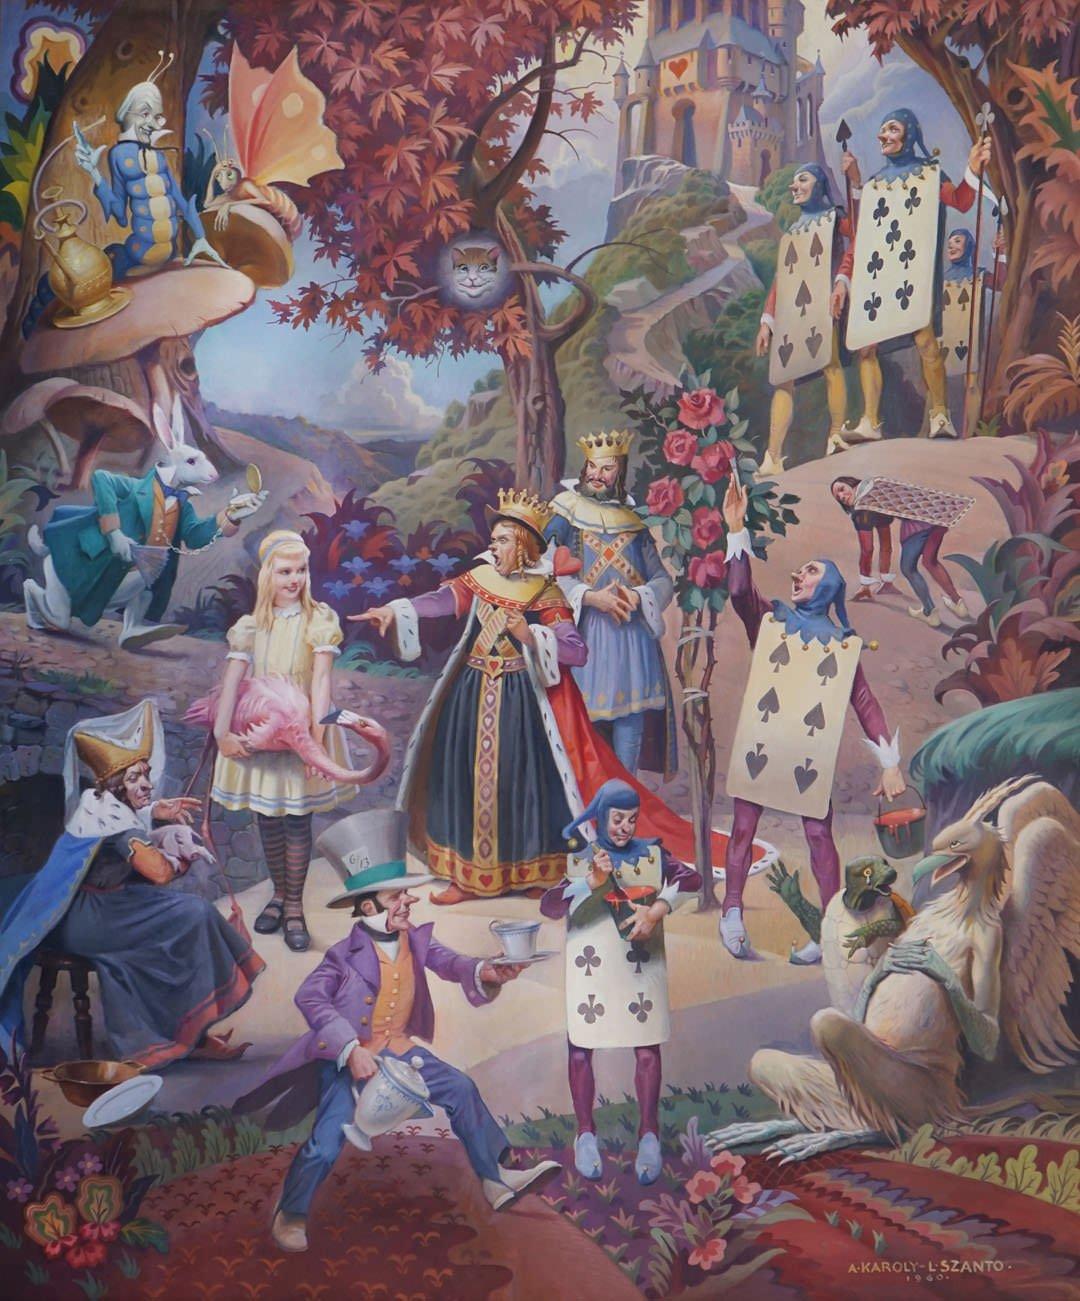 Andrew Karoly (Hungarian-American, 1893-1978)/
Louis Szántó (Hungarian-American, 1889-1965)

Alice in Wonderland, 1960
Oil on canvas
Signed and dated lower right
87 x 72 inches 

Provenance: Purchased and given to the Bertram Woods Branch of the